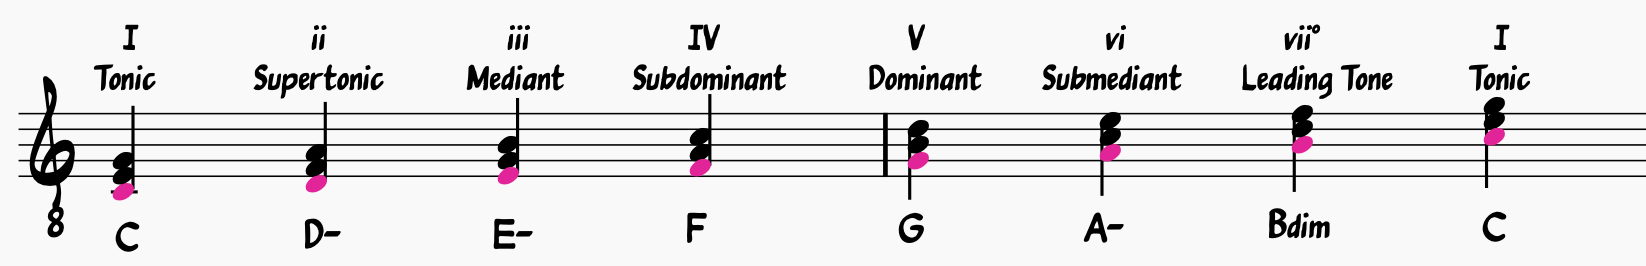 Diatonic Triads in the Key of C Major with Roman Numerals; C major scale outlined in Red